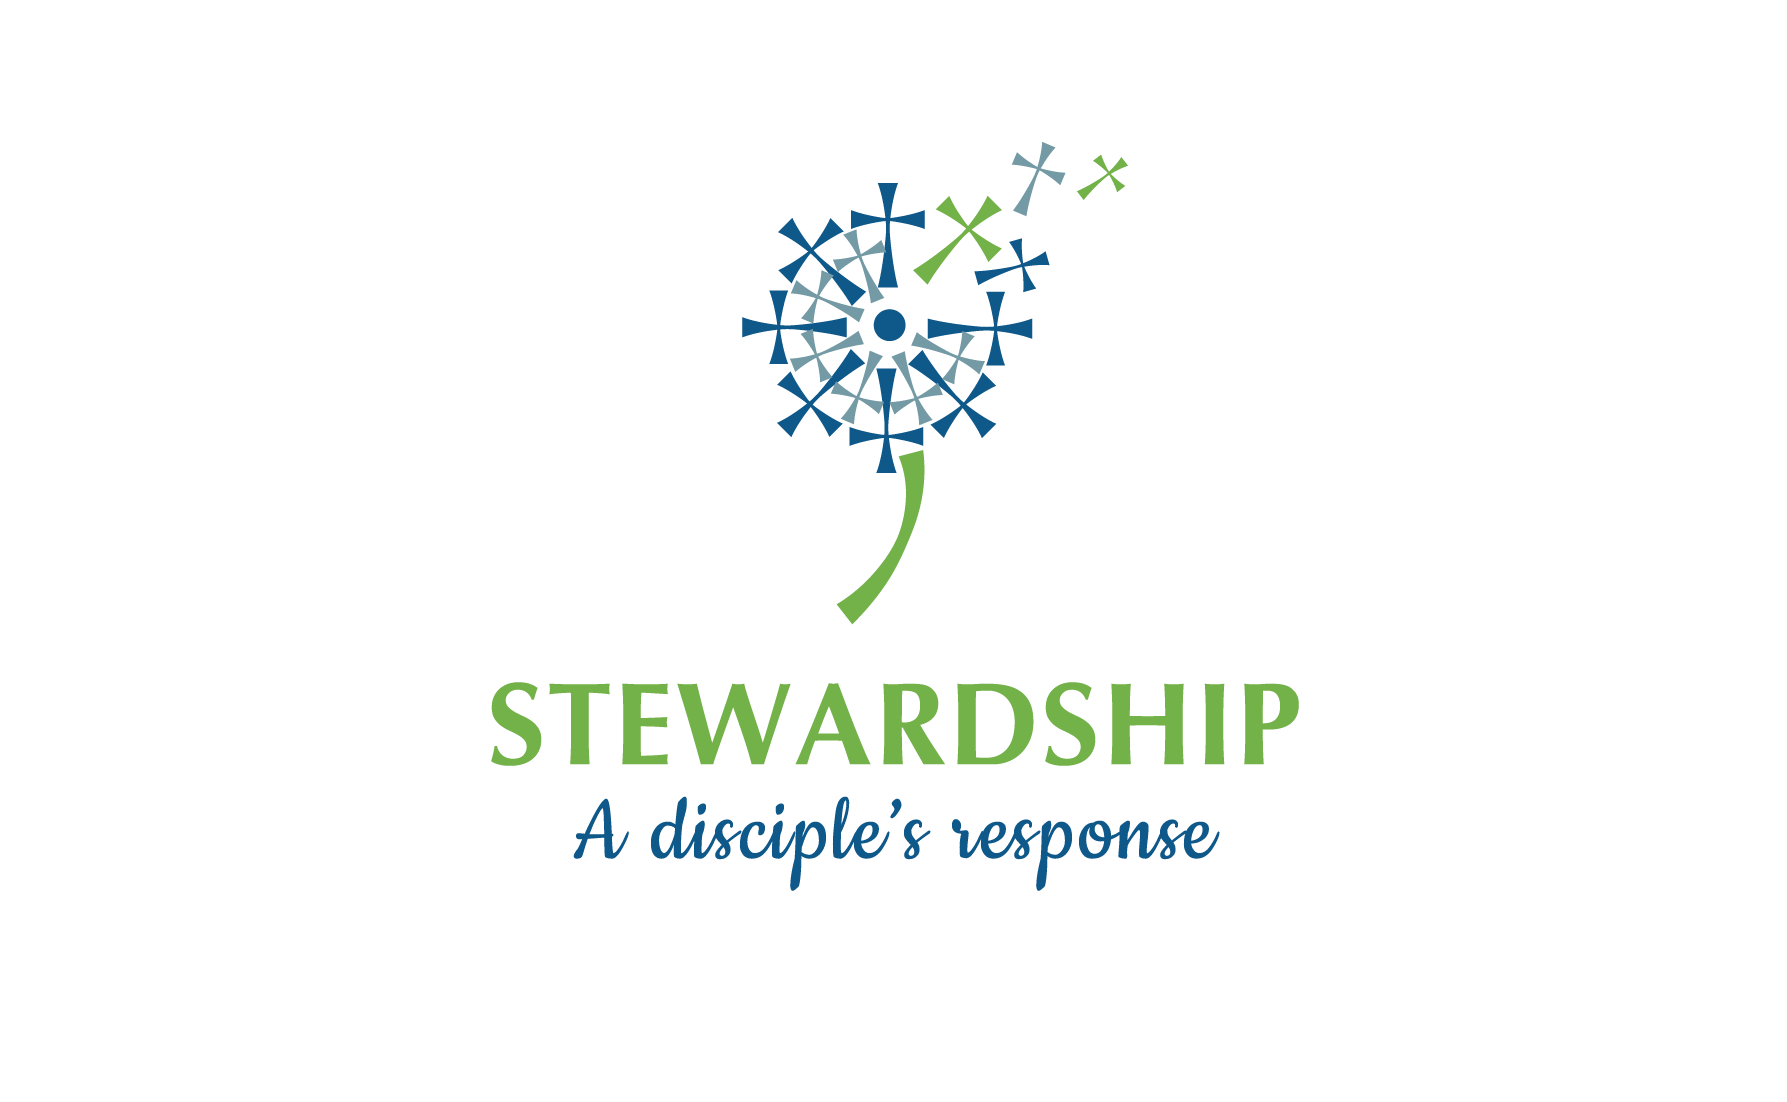 Diocese of Charleston, SC - Logo for the Stewardship Campaign - A flower with Crosses